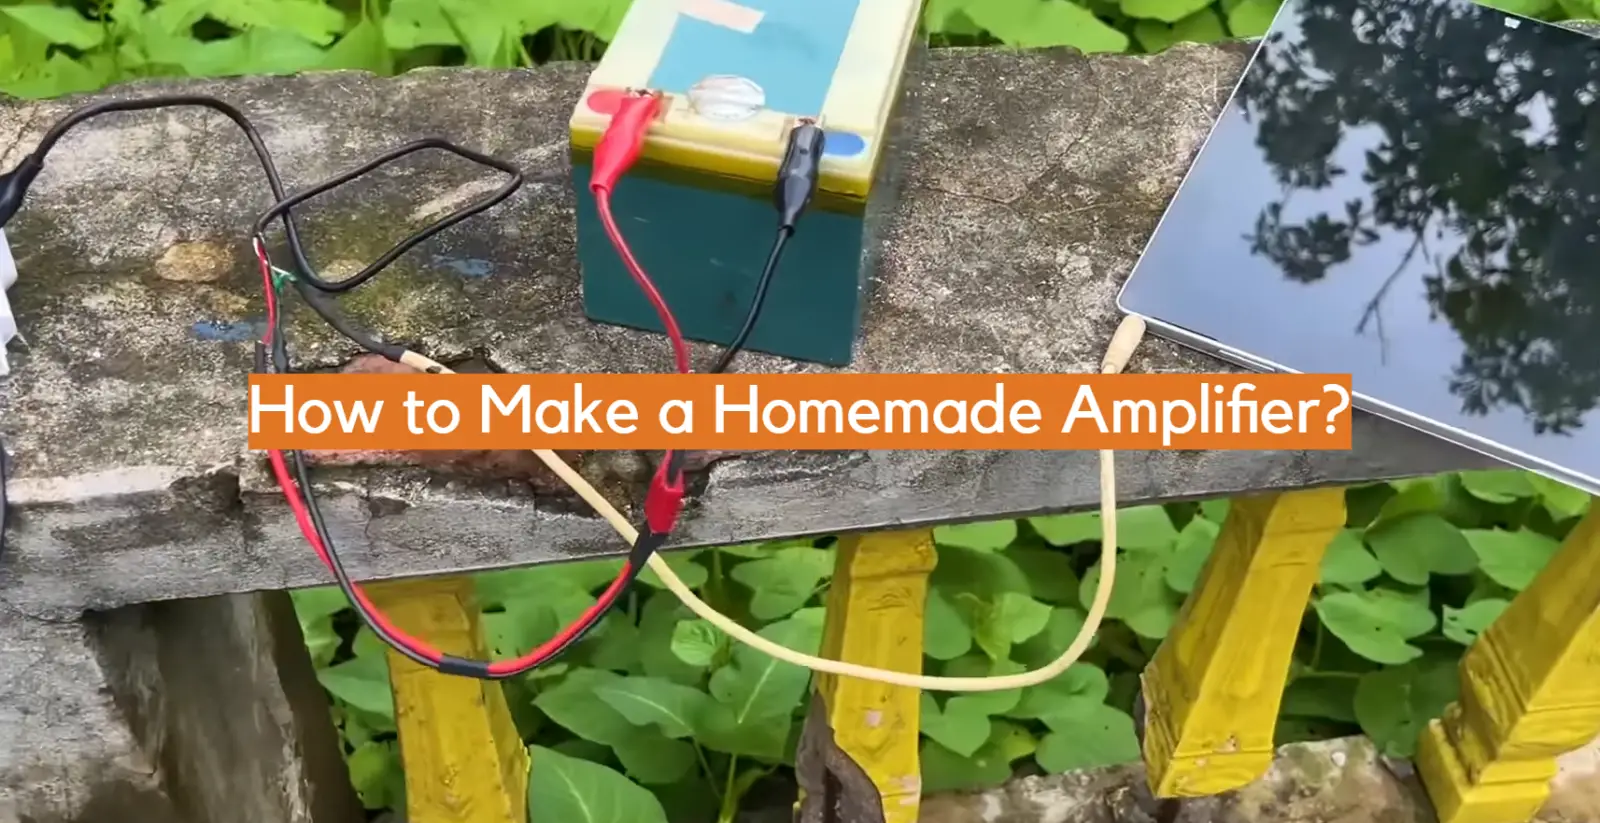 How to Make a Homemade Amplifier?